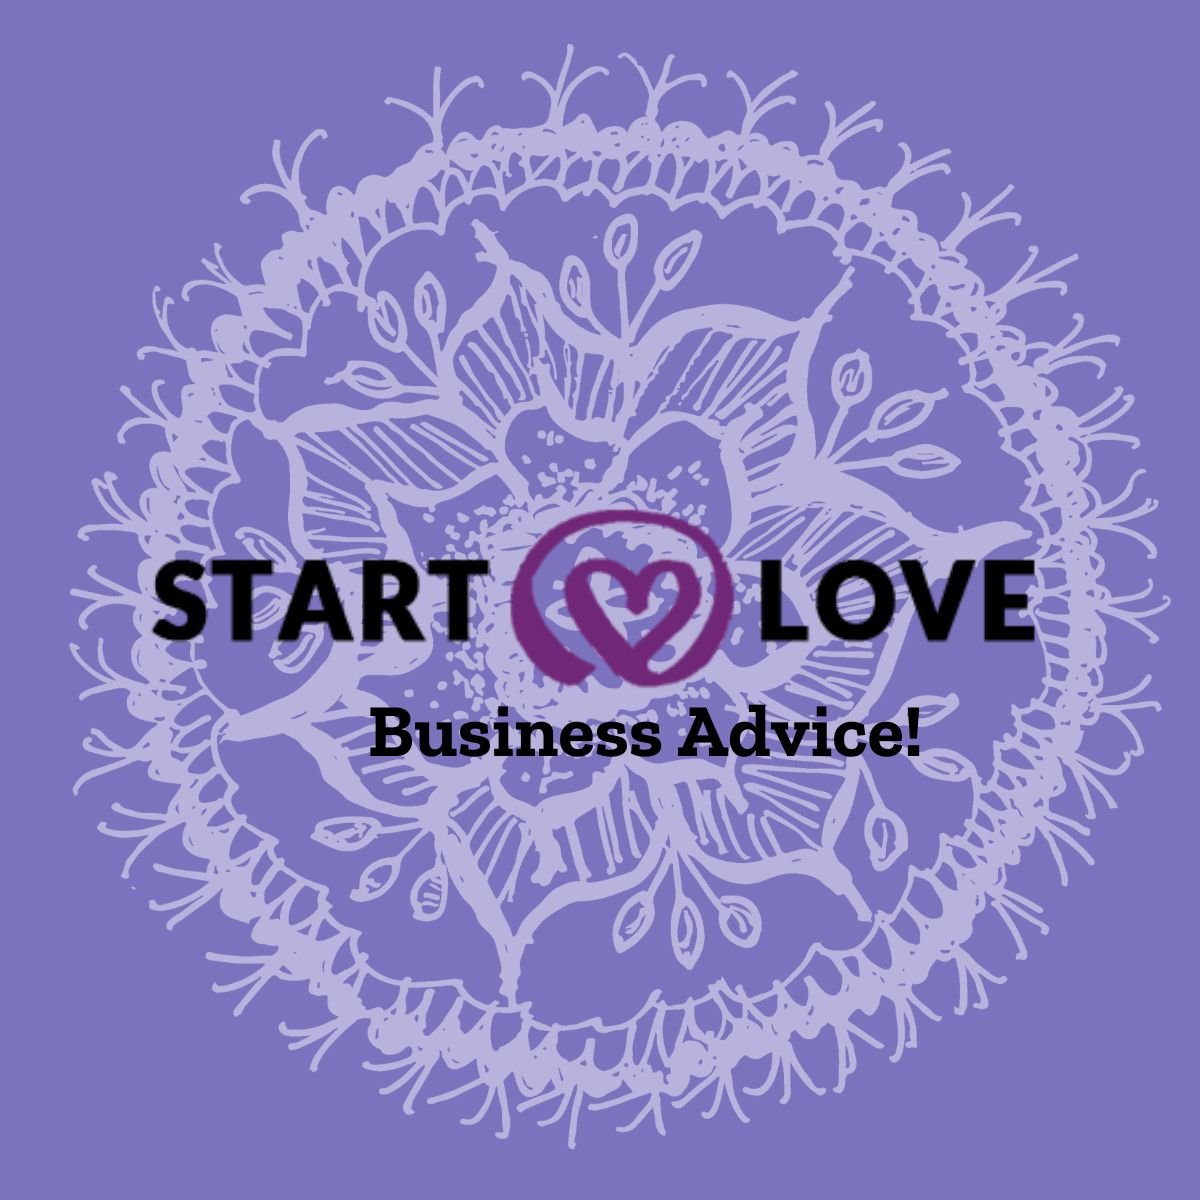 Tips to Keep in Mind When Starting a Business - Darn Good Yarn